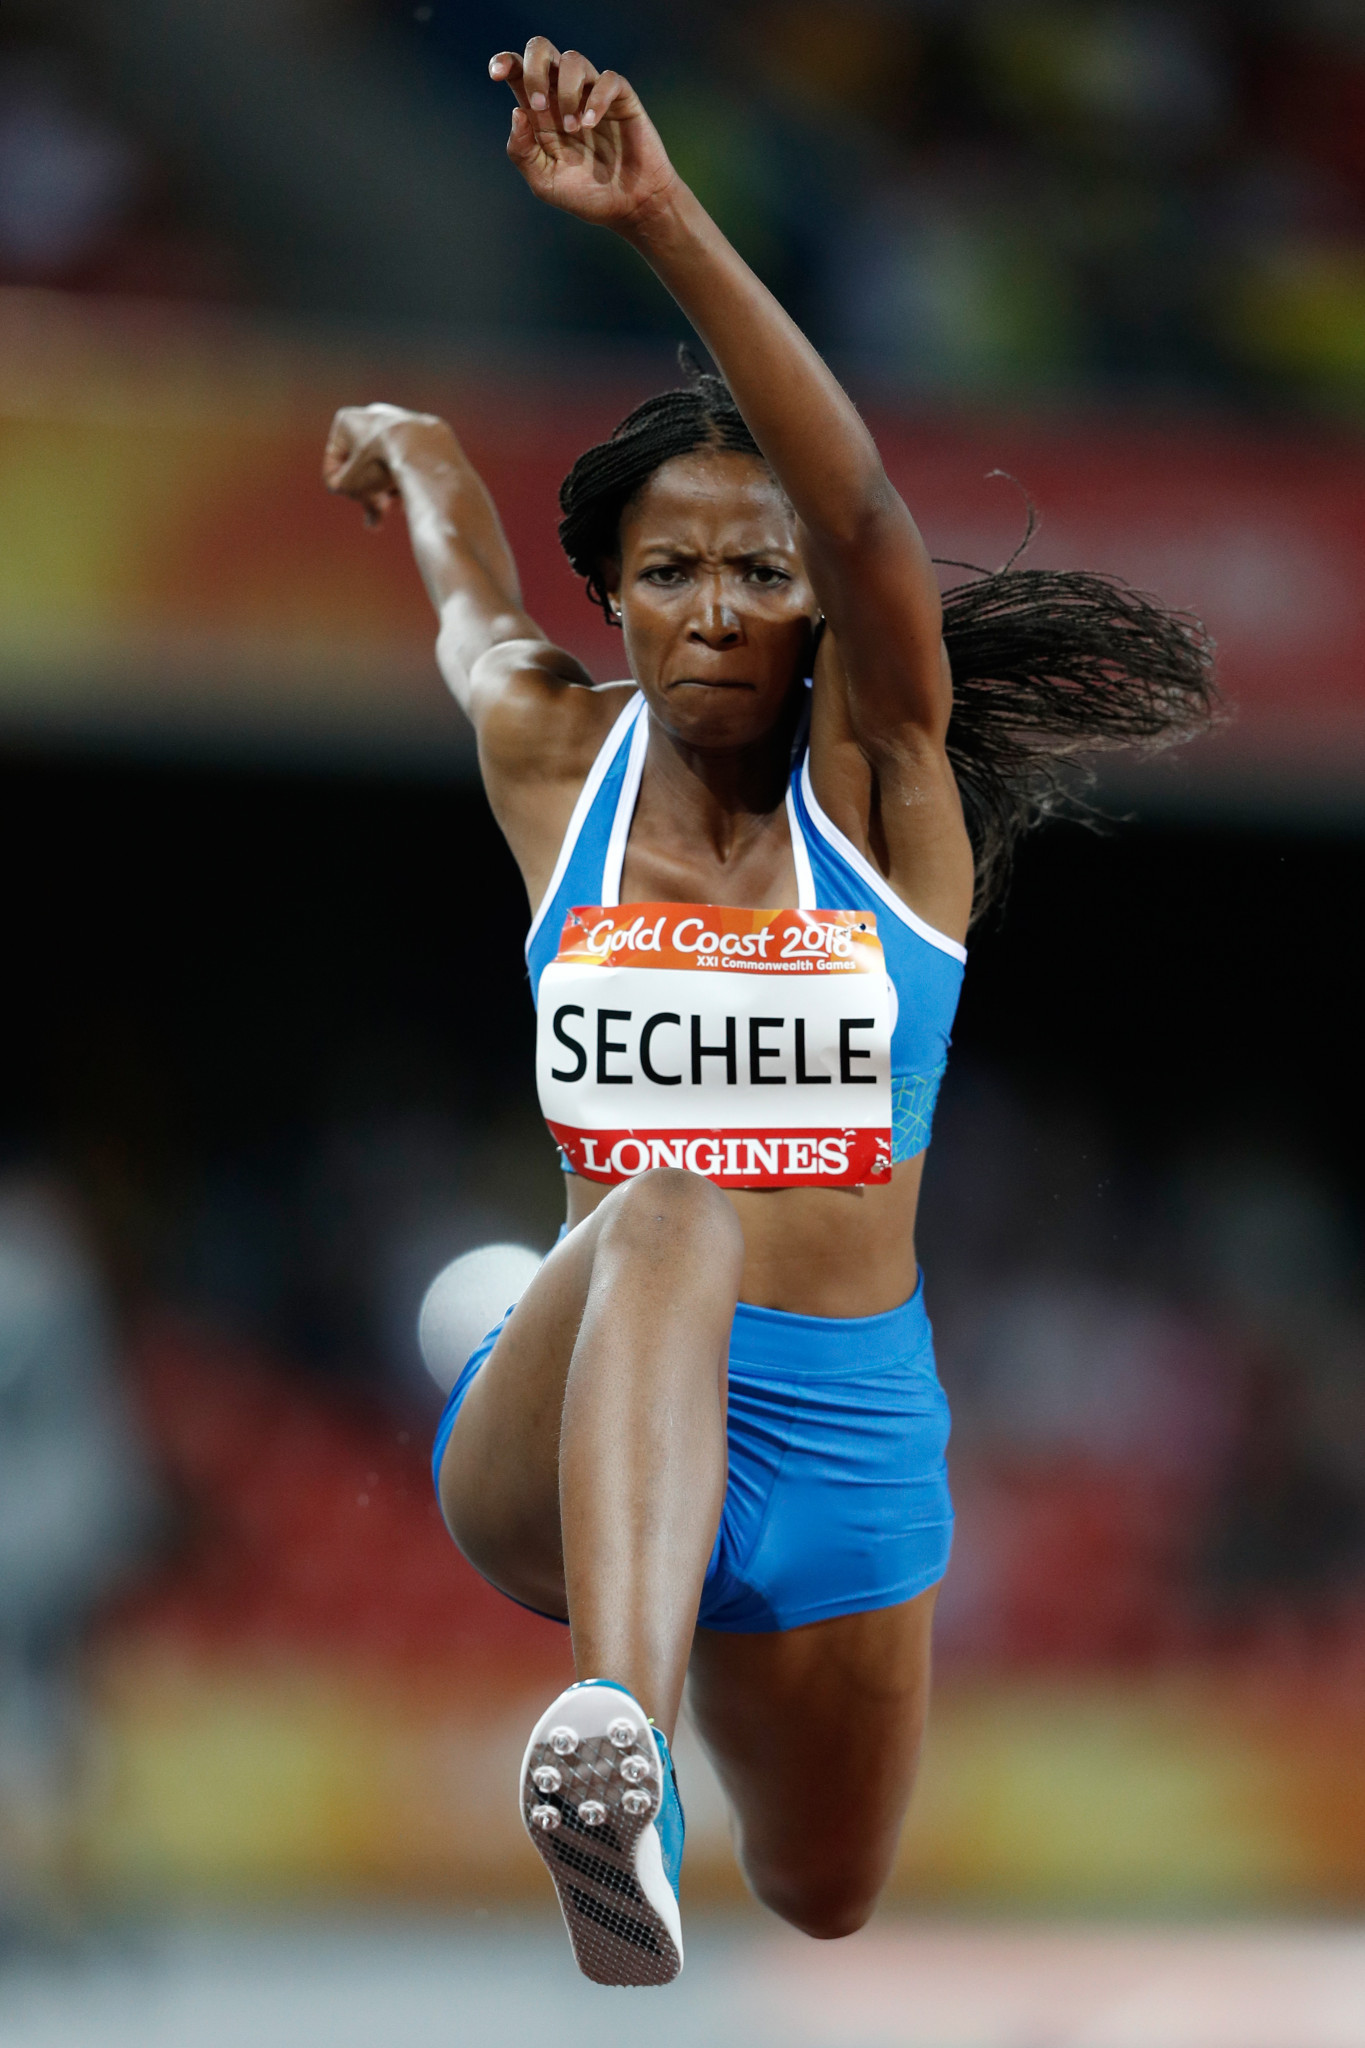 Lerato Sechele narrowly missed a medal for Lesotho at Gold Coast 2018 after coming fourth in the women's triple jump ©Getty Images